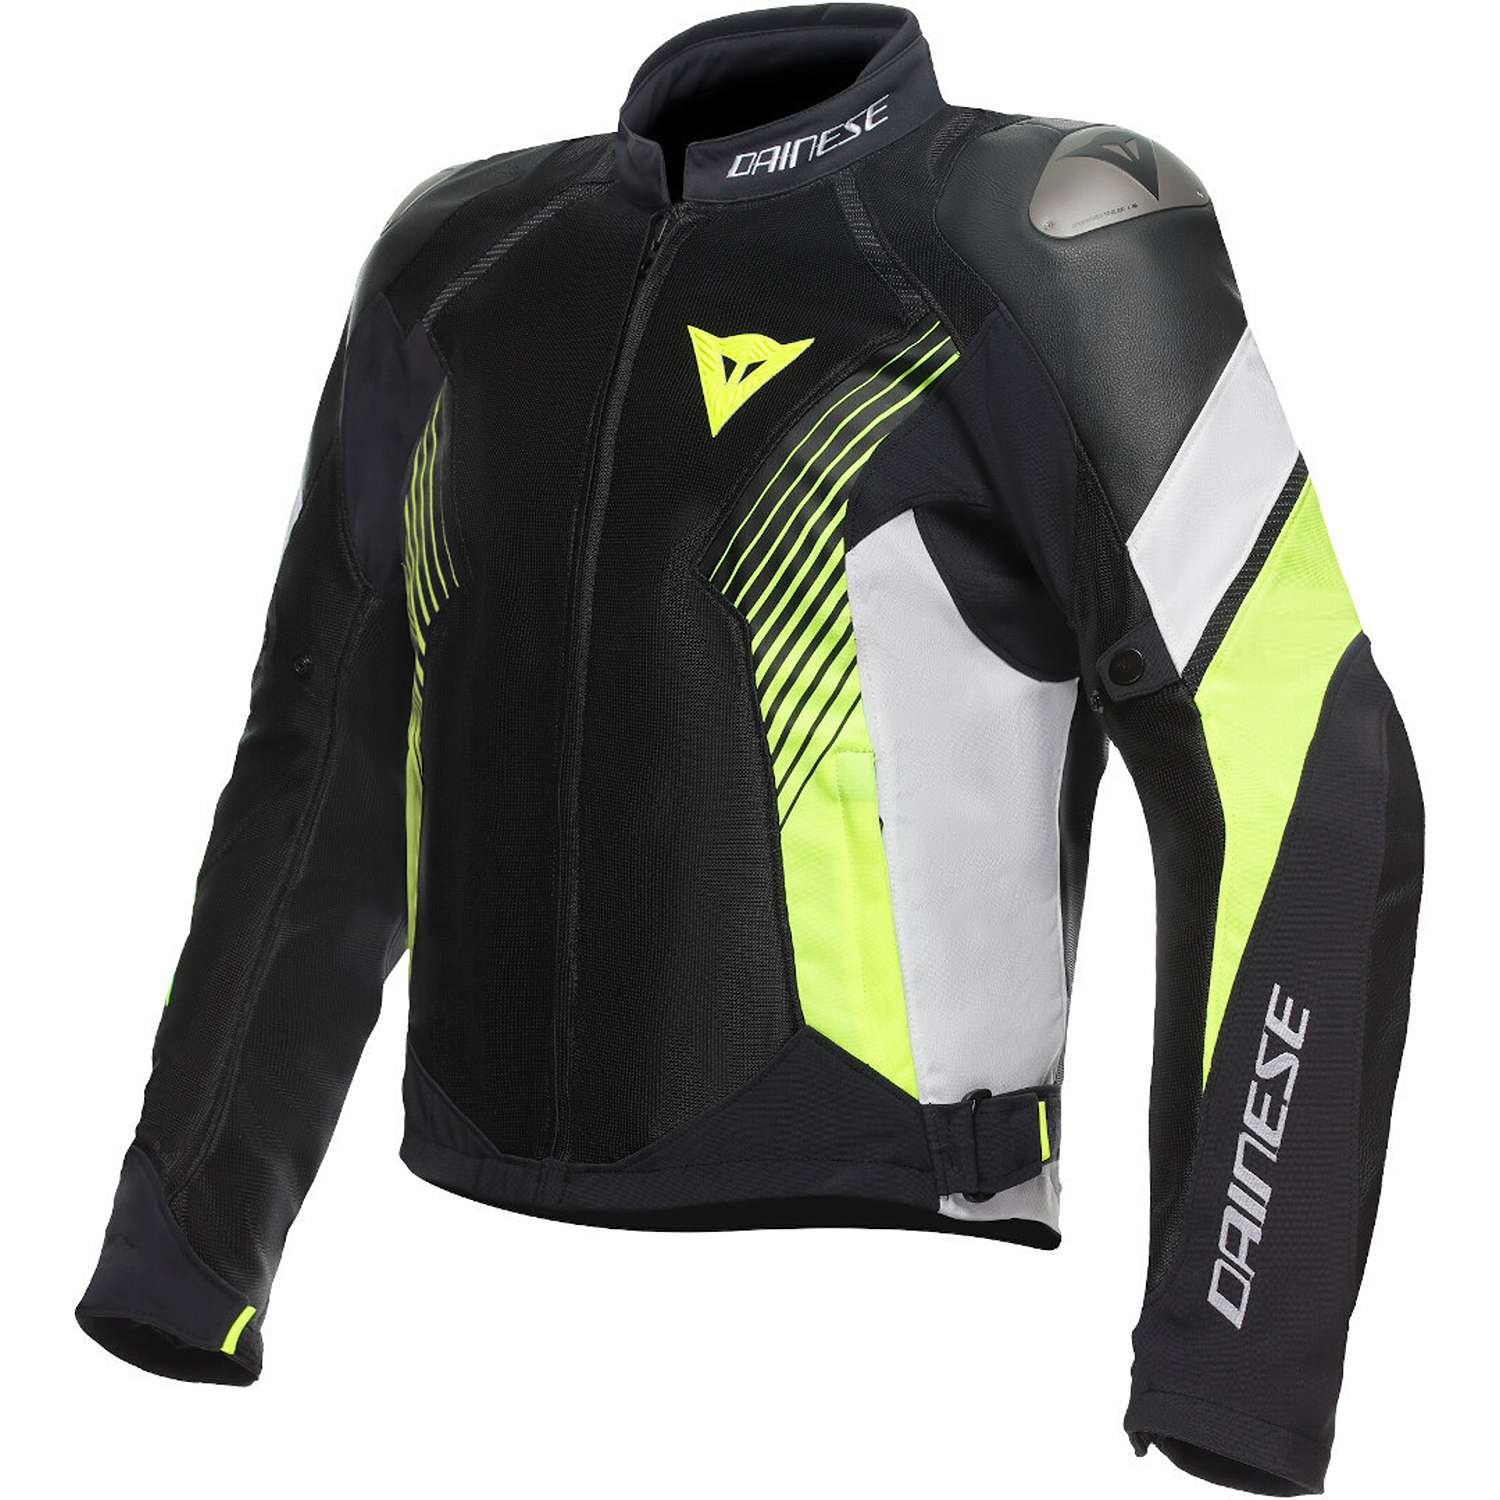 Image of Dainese Super Rider 2 Absoluteshell Jacket Black White Fluo Yellow Größe 50